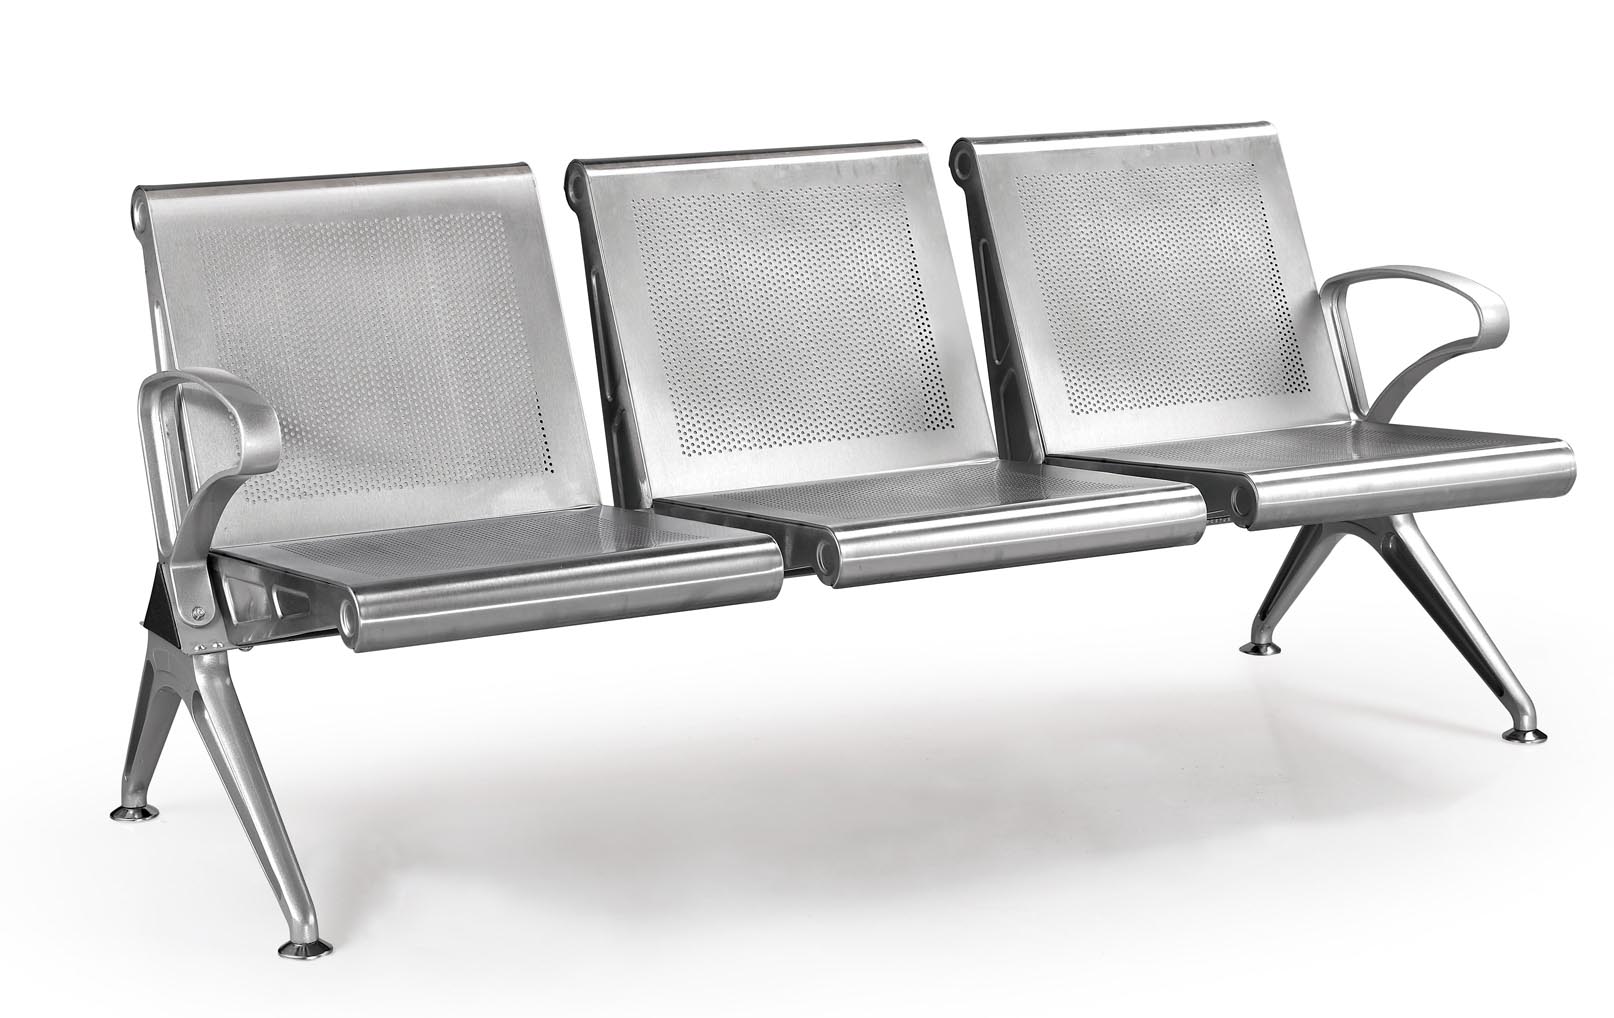 Stainless Steel Airport Chair